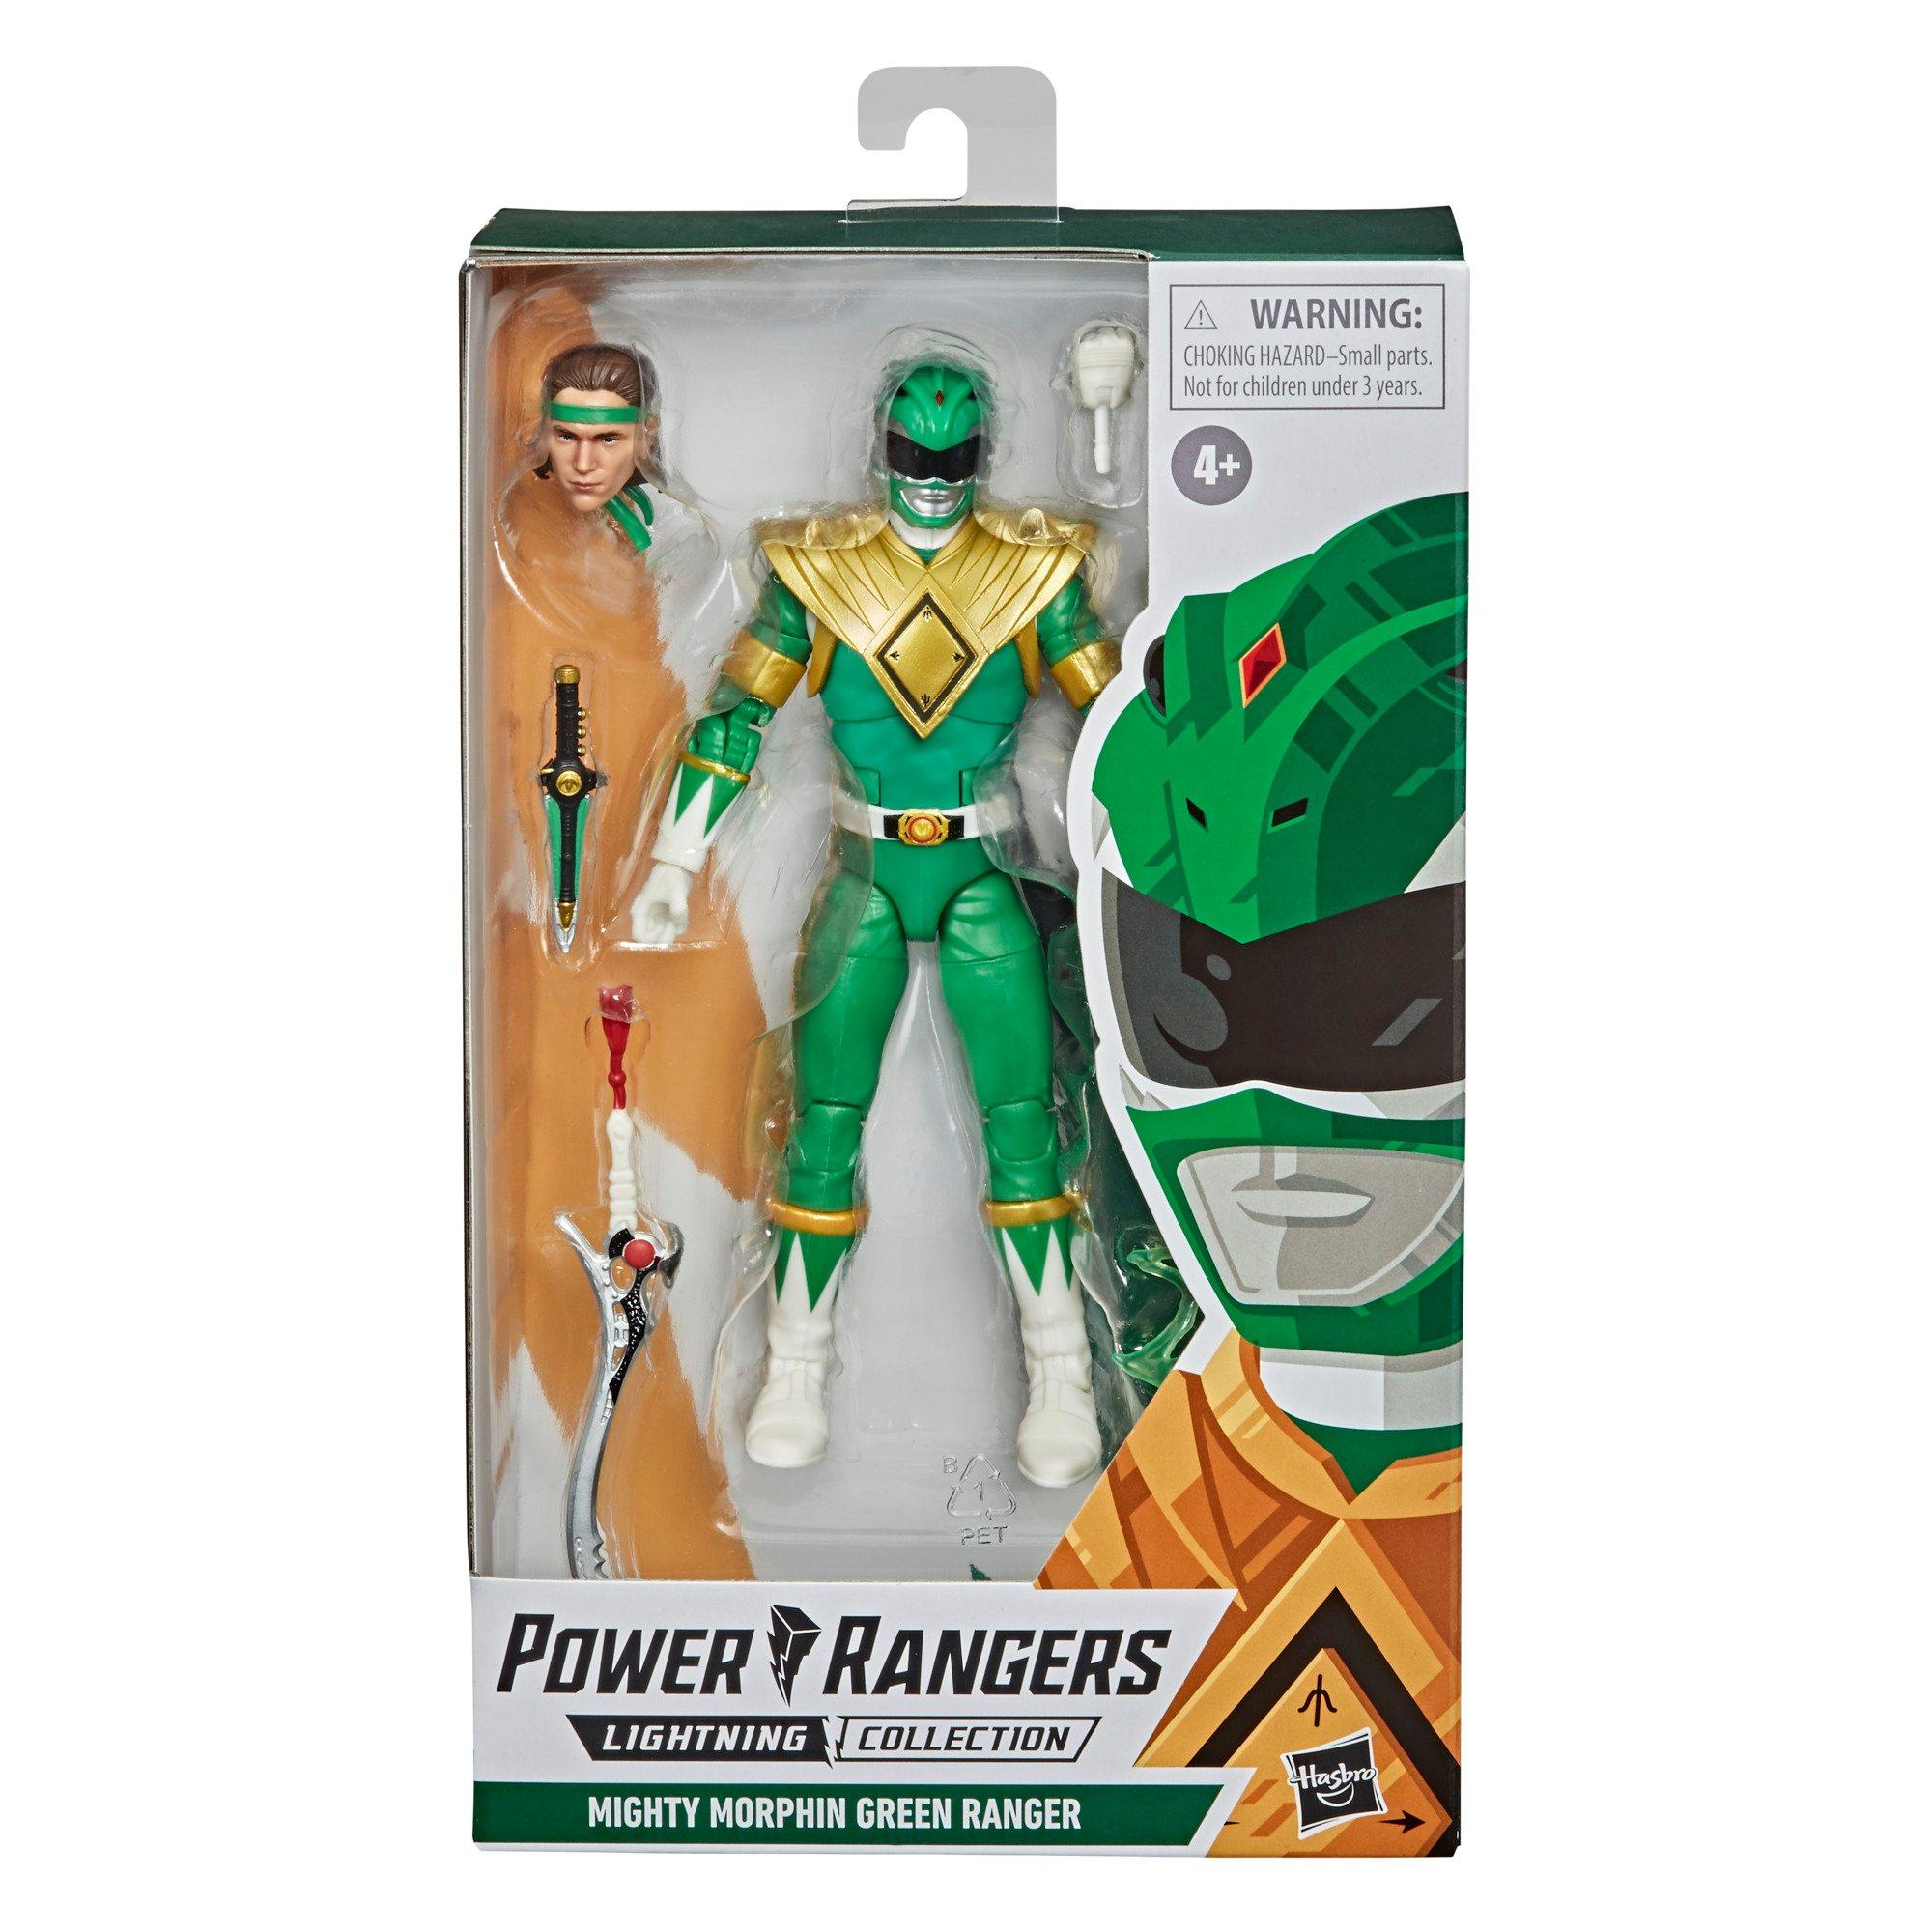 Hasbro Power Rangers Lightning Collection Mighty Morphin Green Ranger 6-in Action Figure